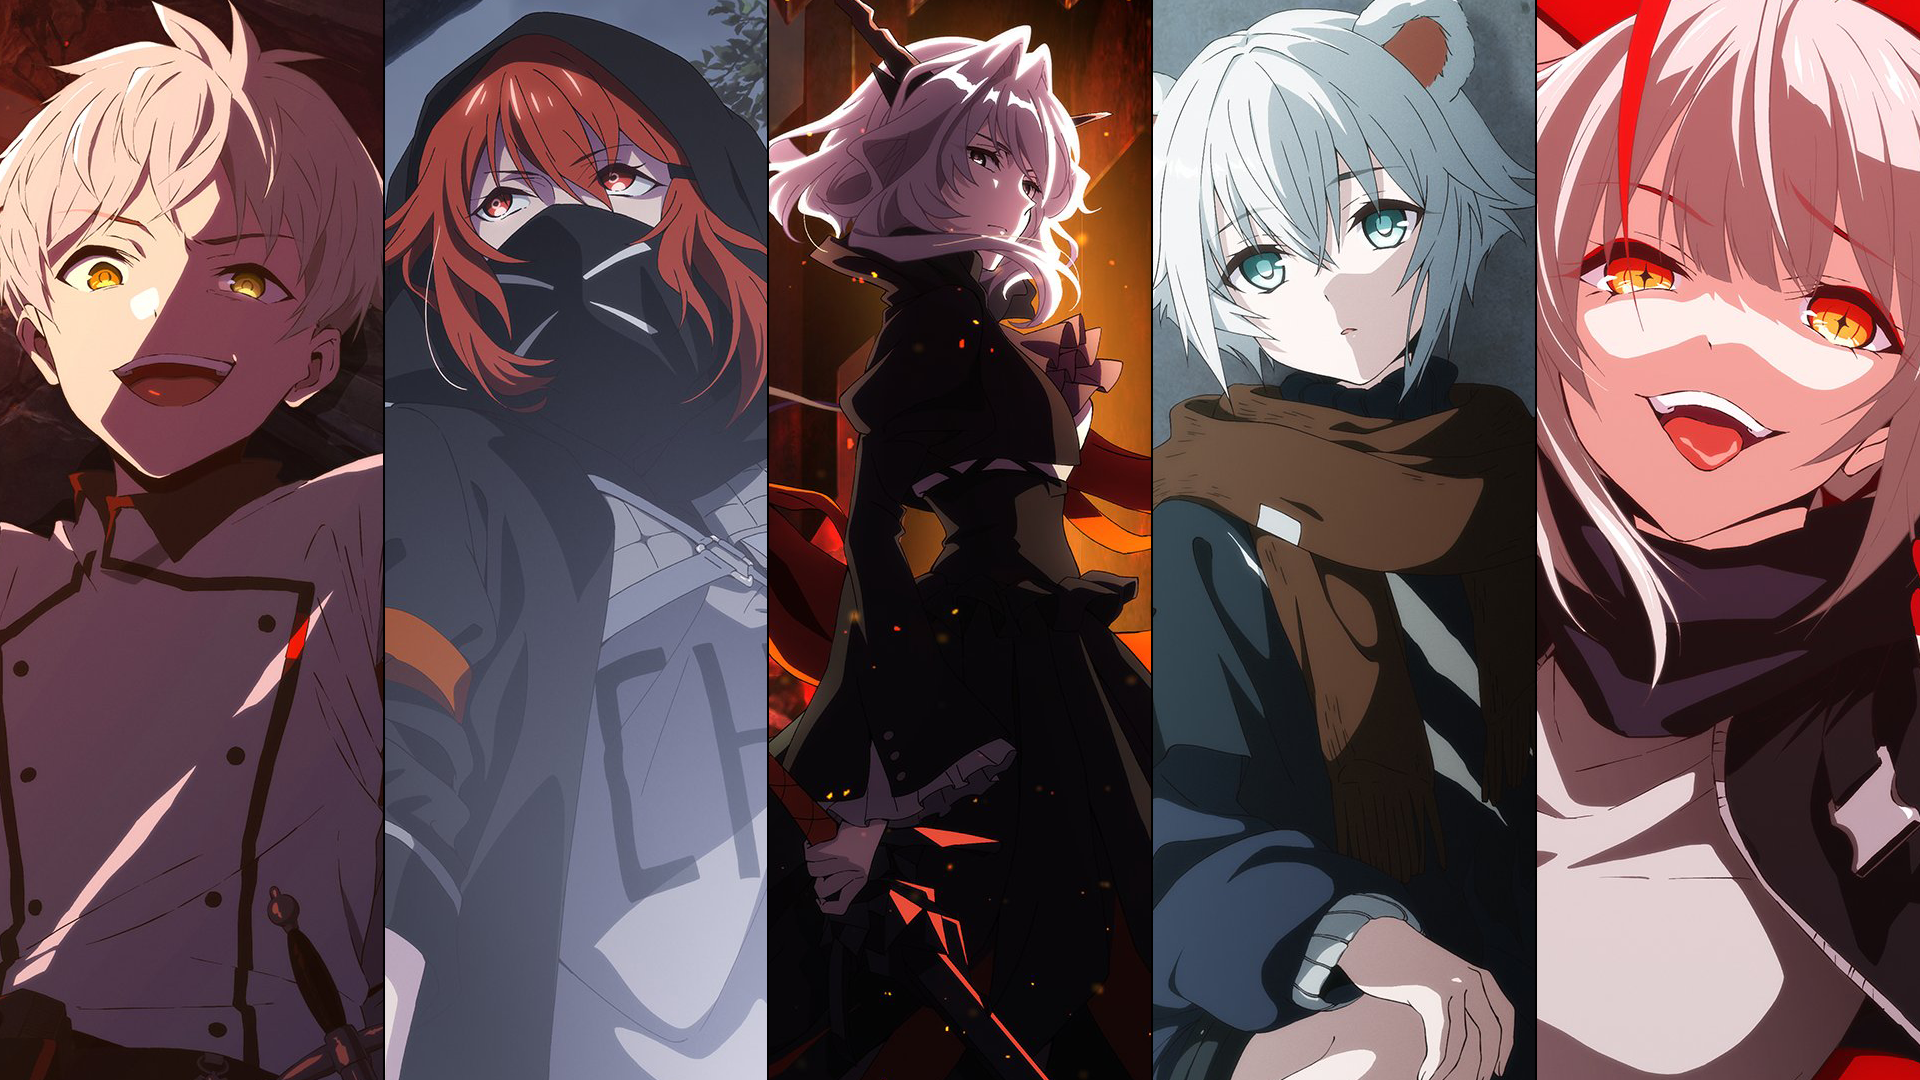 Arknights: PERISH IN FROST characters
